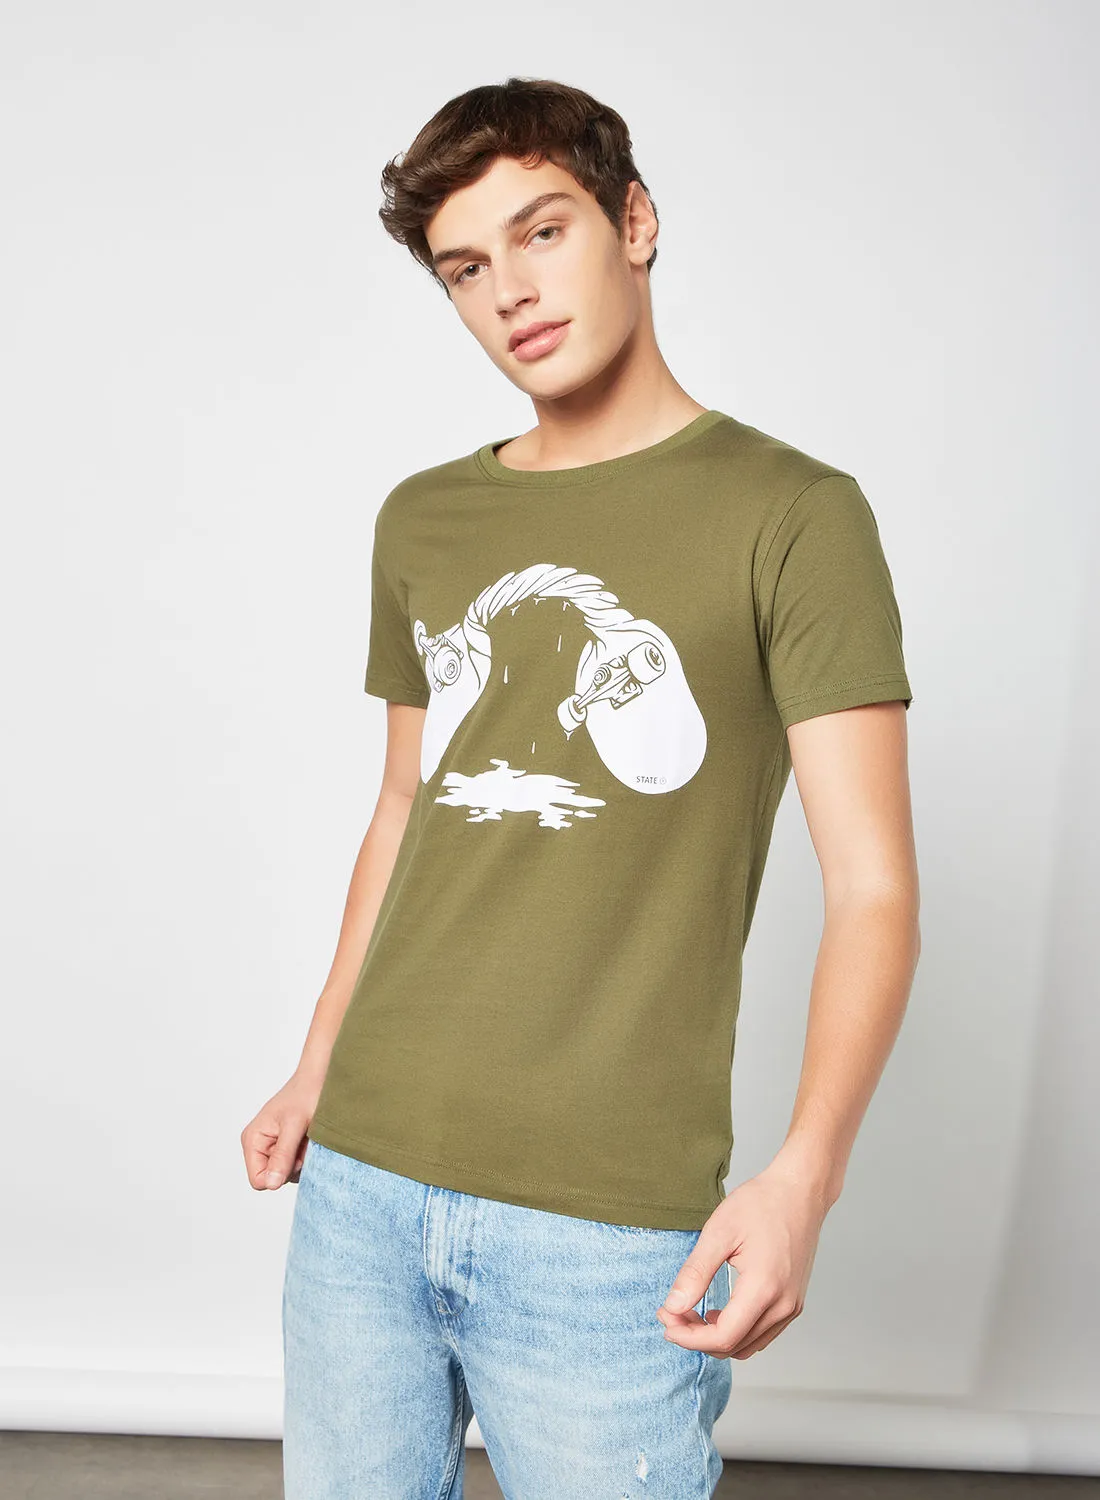 STATE 8 Graphic Print T-Shirt Green